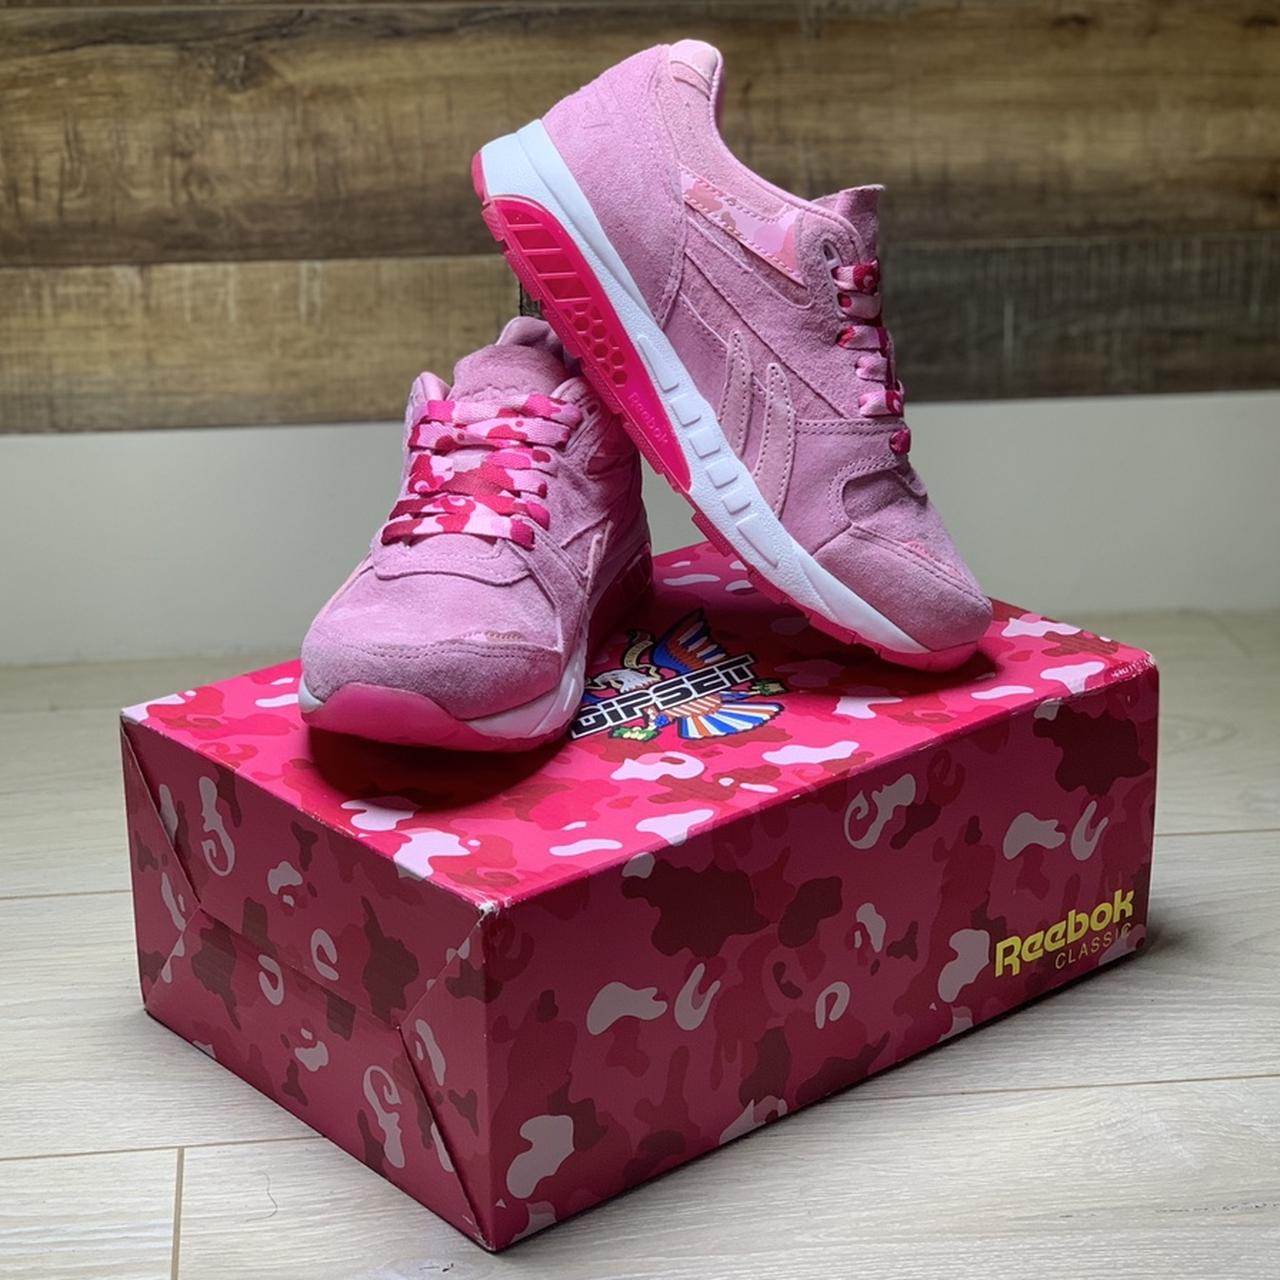 Reebok Women's Pink and White Trainers